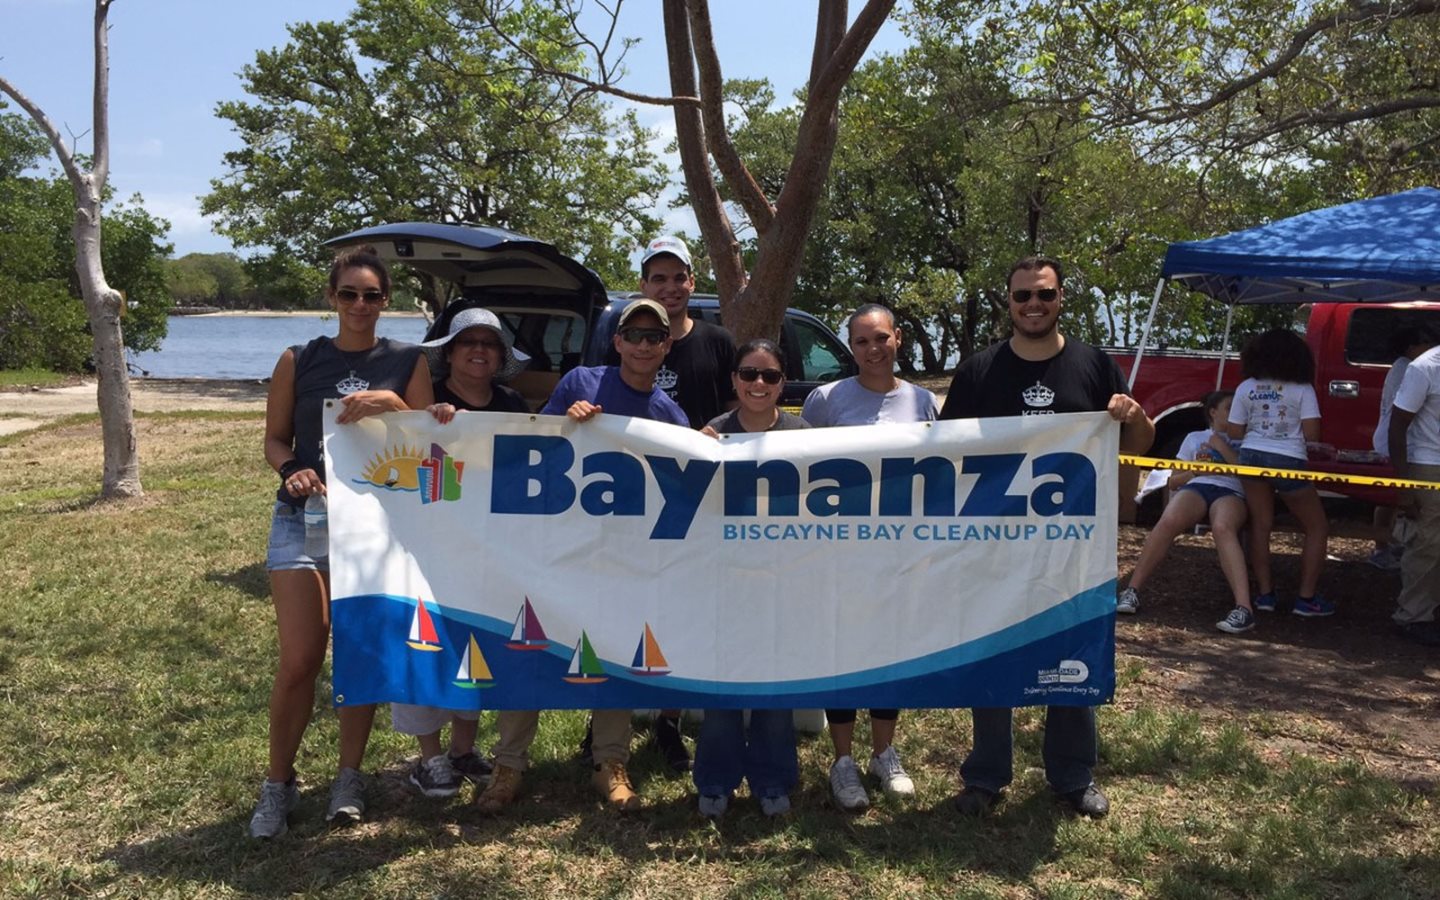 Group from Biscayne Bay cleanup day holding Baynanza Banner